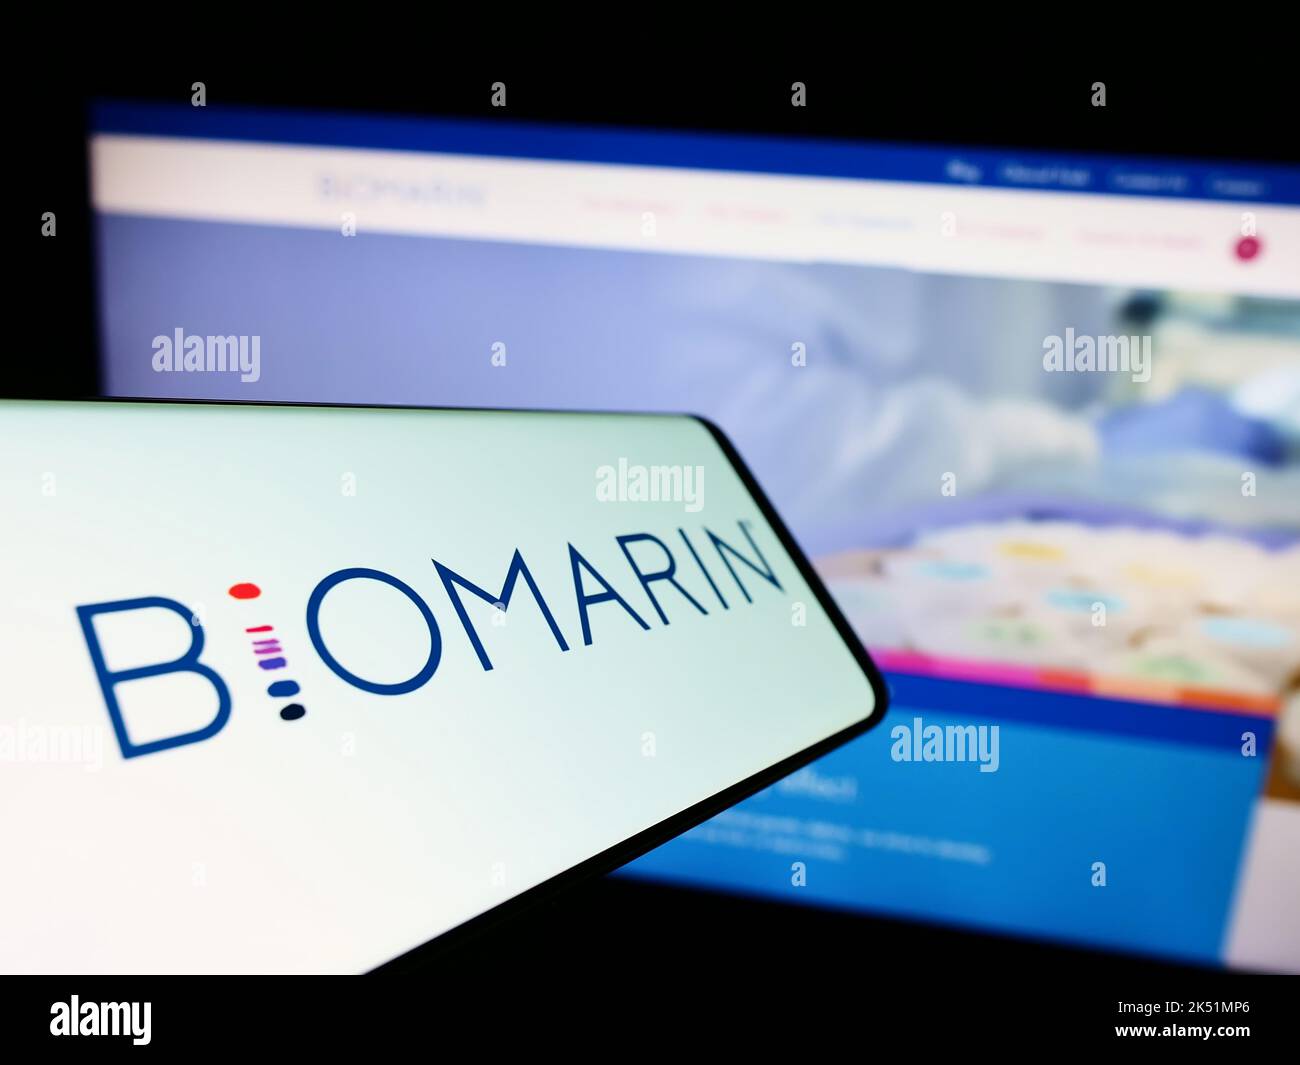 Mobile phone with logo of American company BioMarin Pharmaceutical Inc. on screen in front of website. Focus on center of phone display. Stock Photo